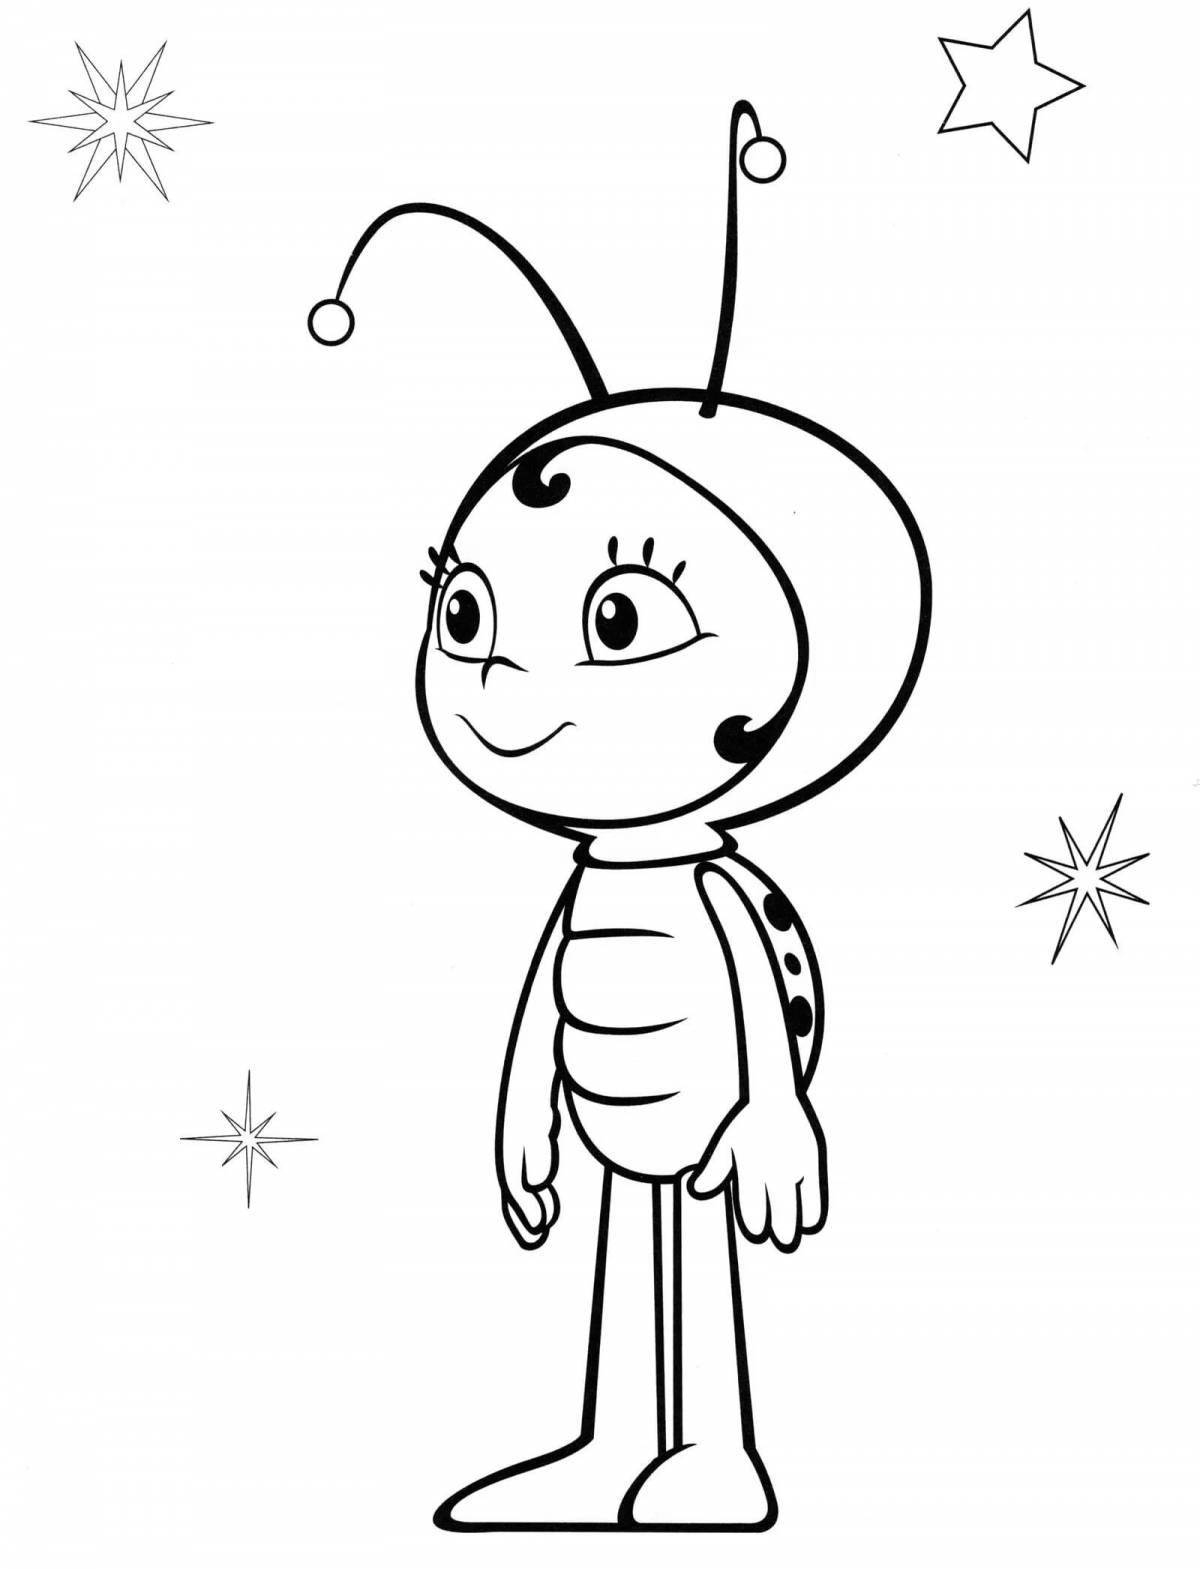 Maya bee crazy coloring book for kids